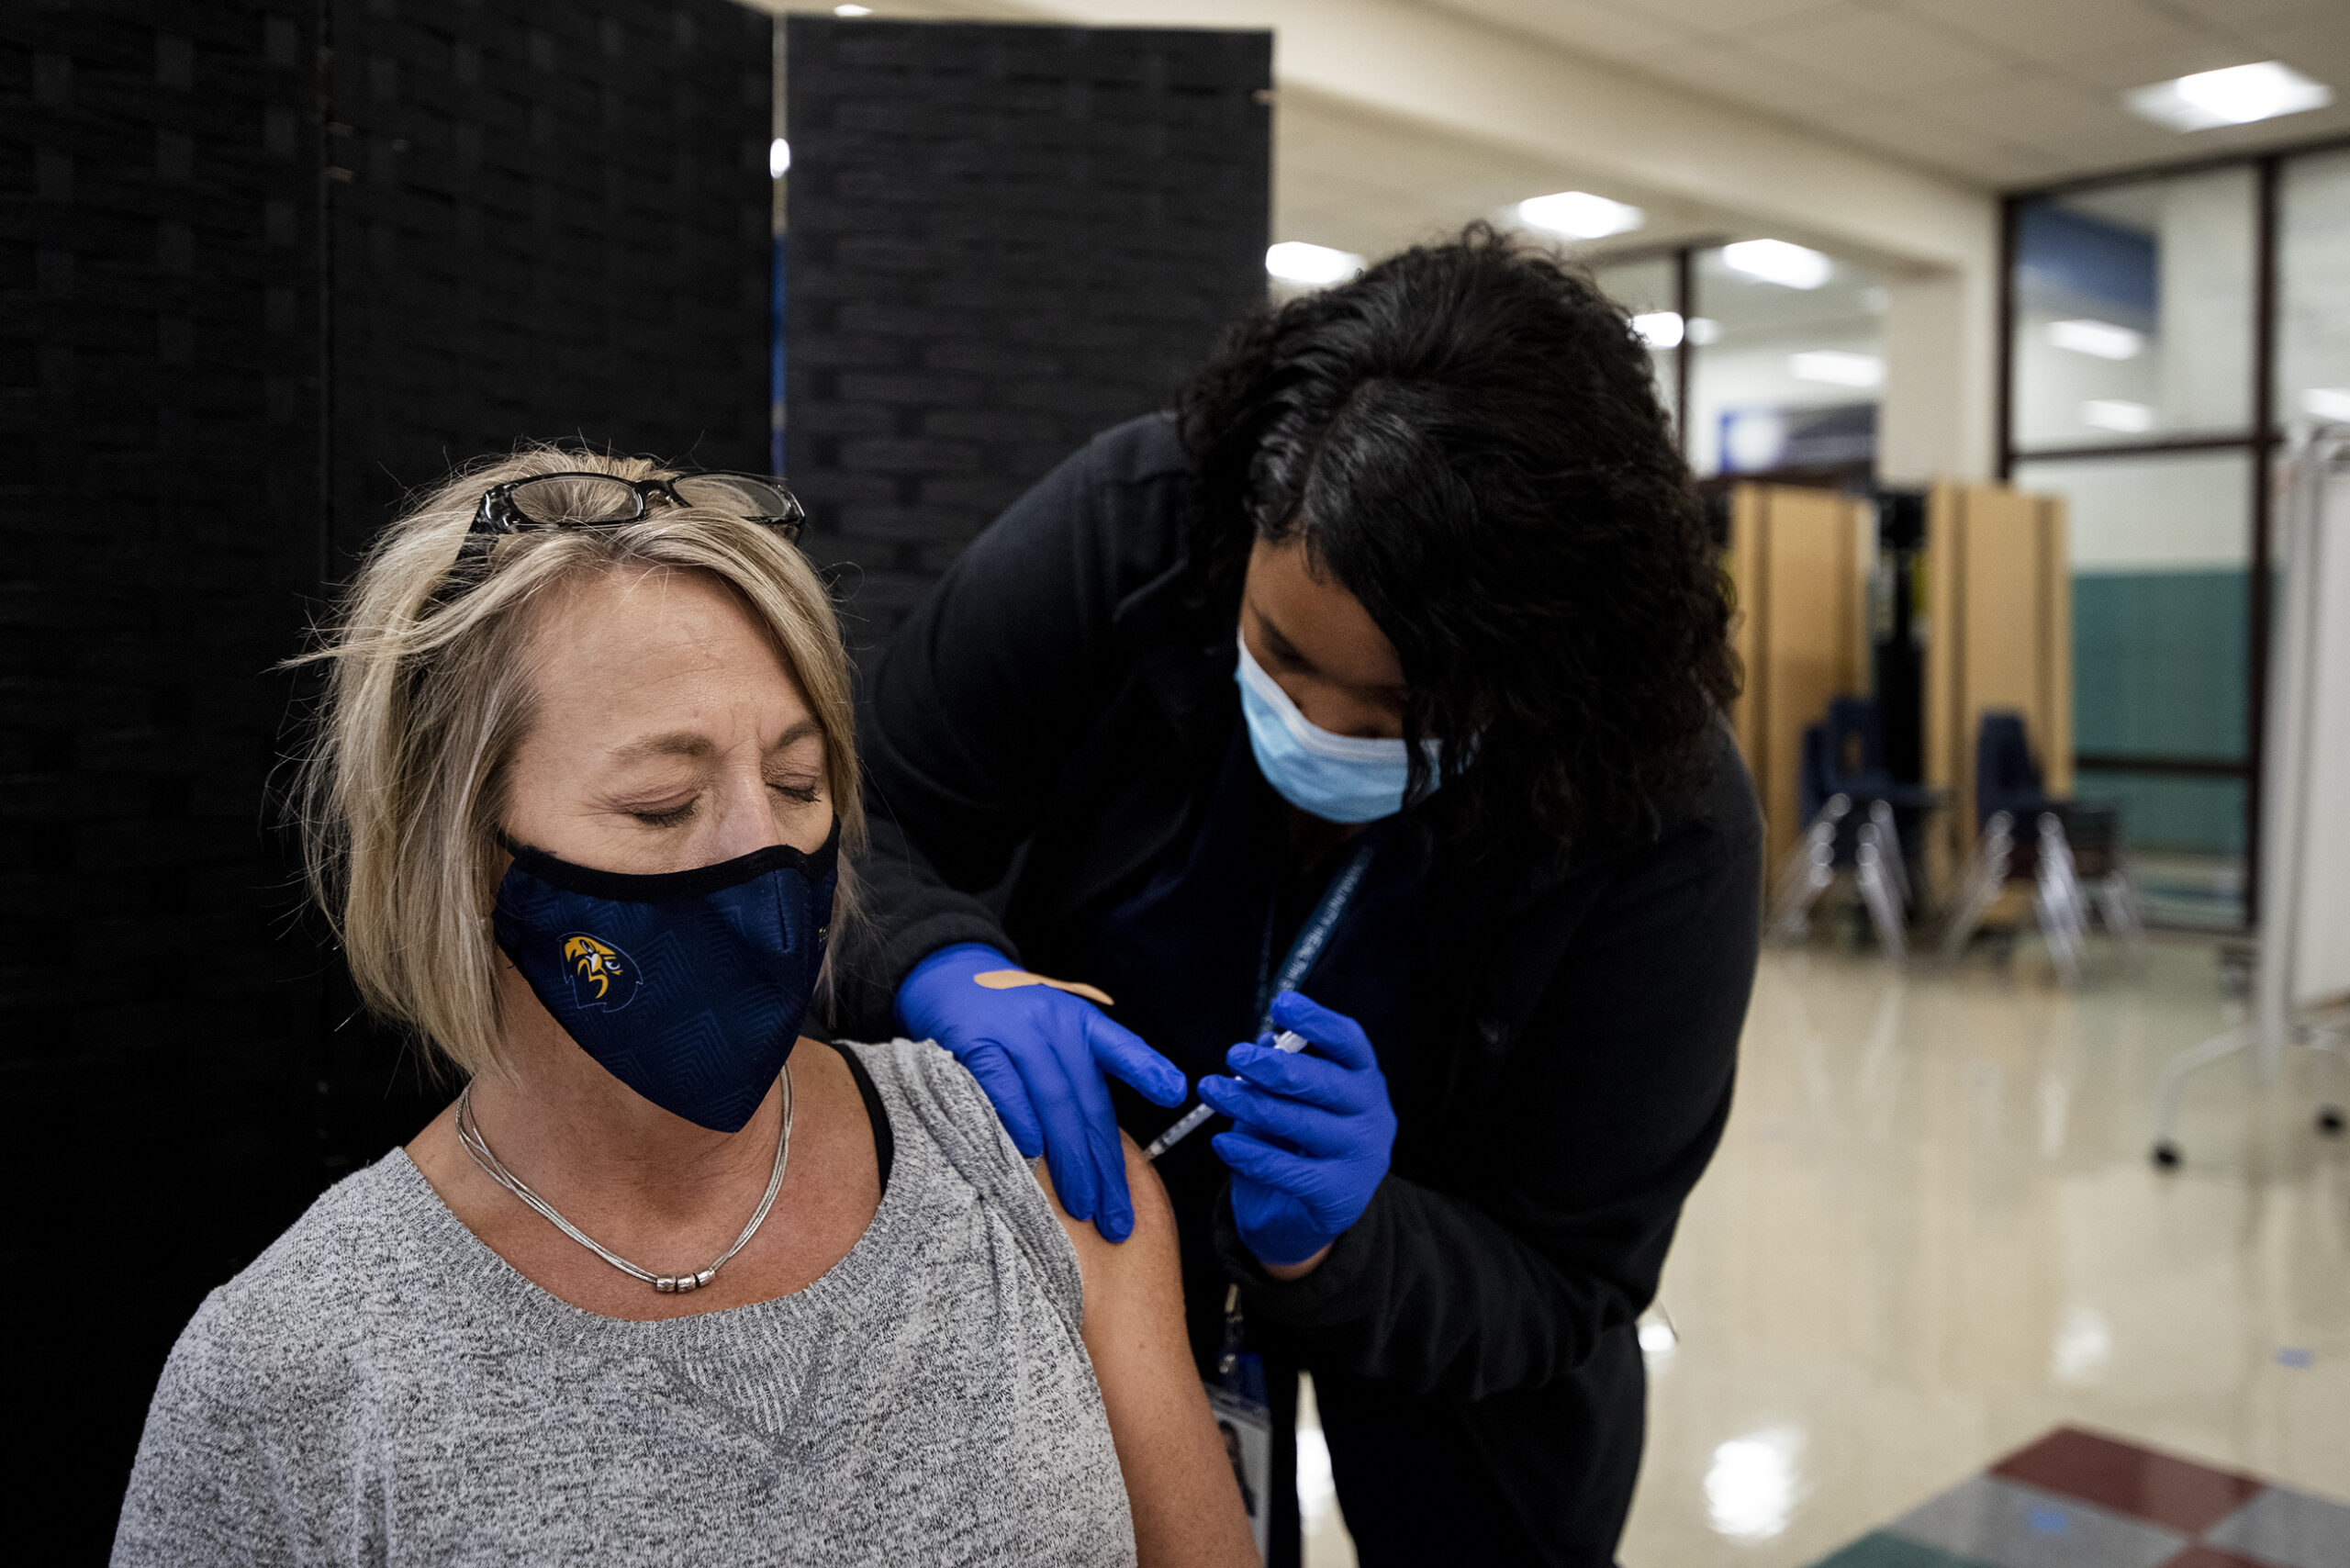 A woman in a face mask closes her eyes as she receives a shot